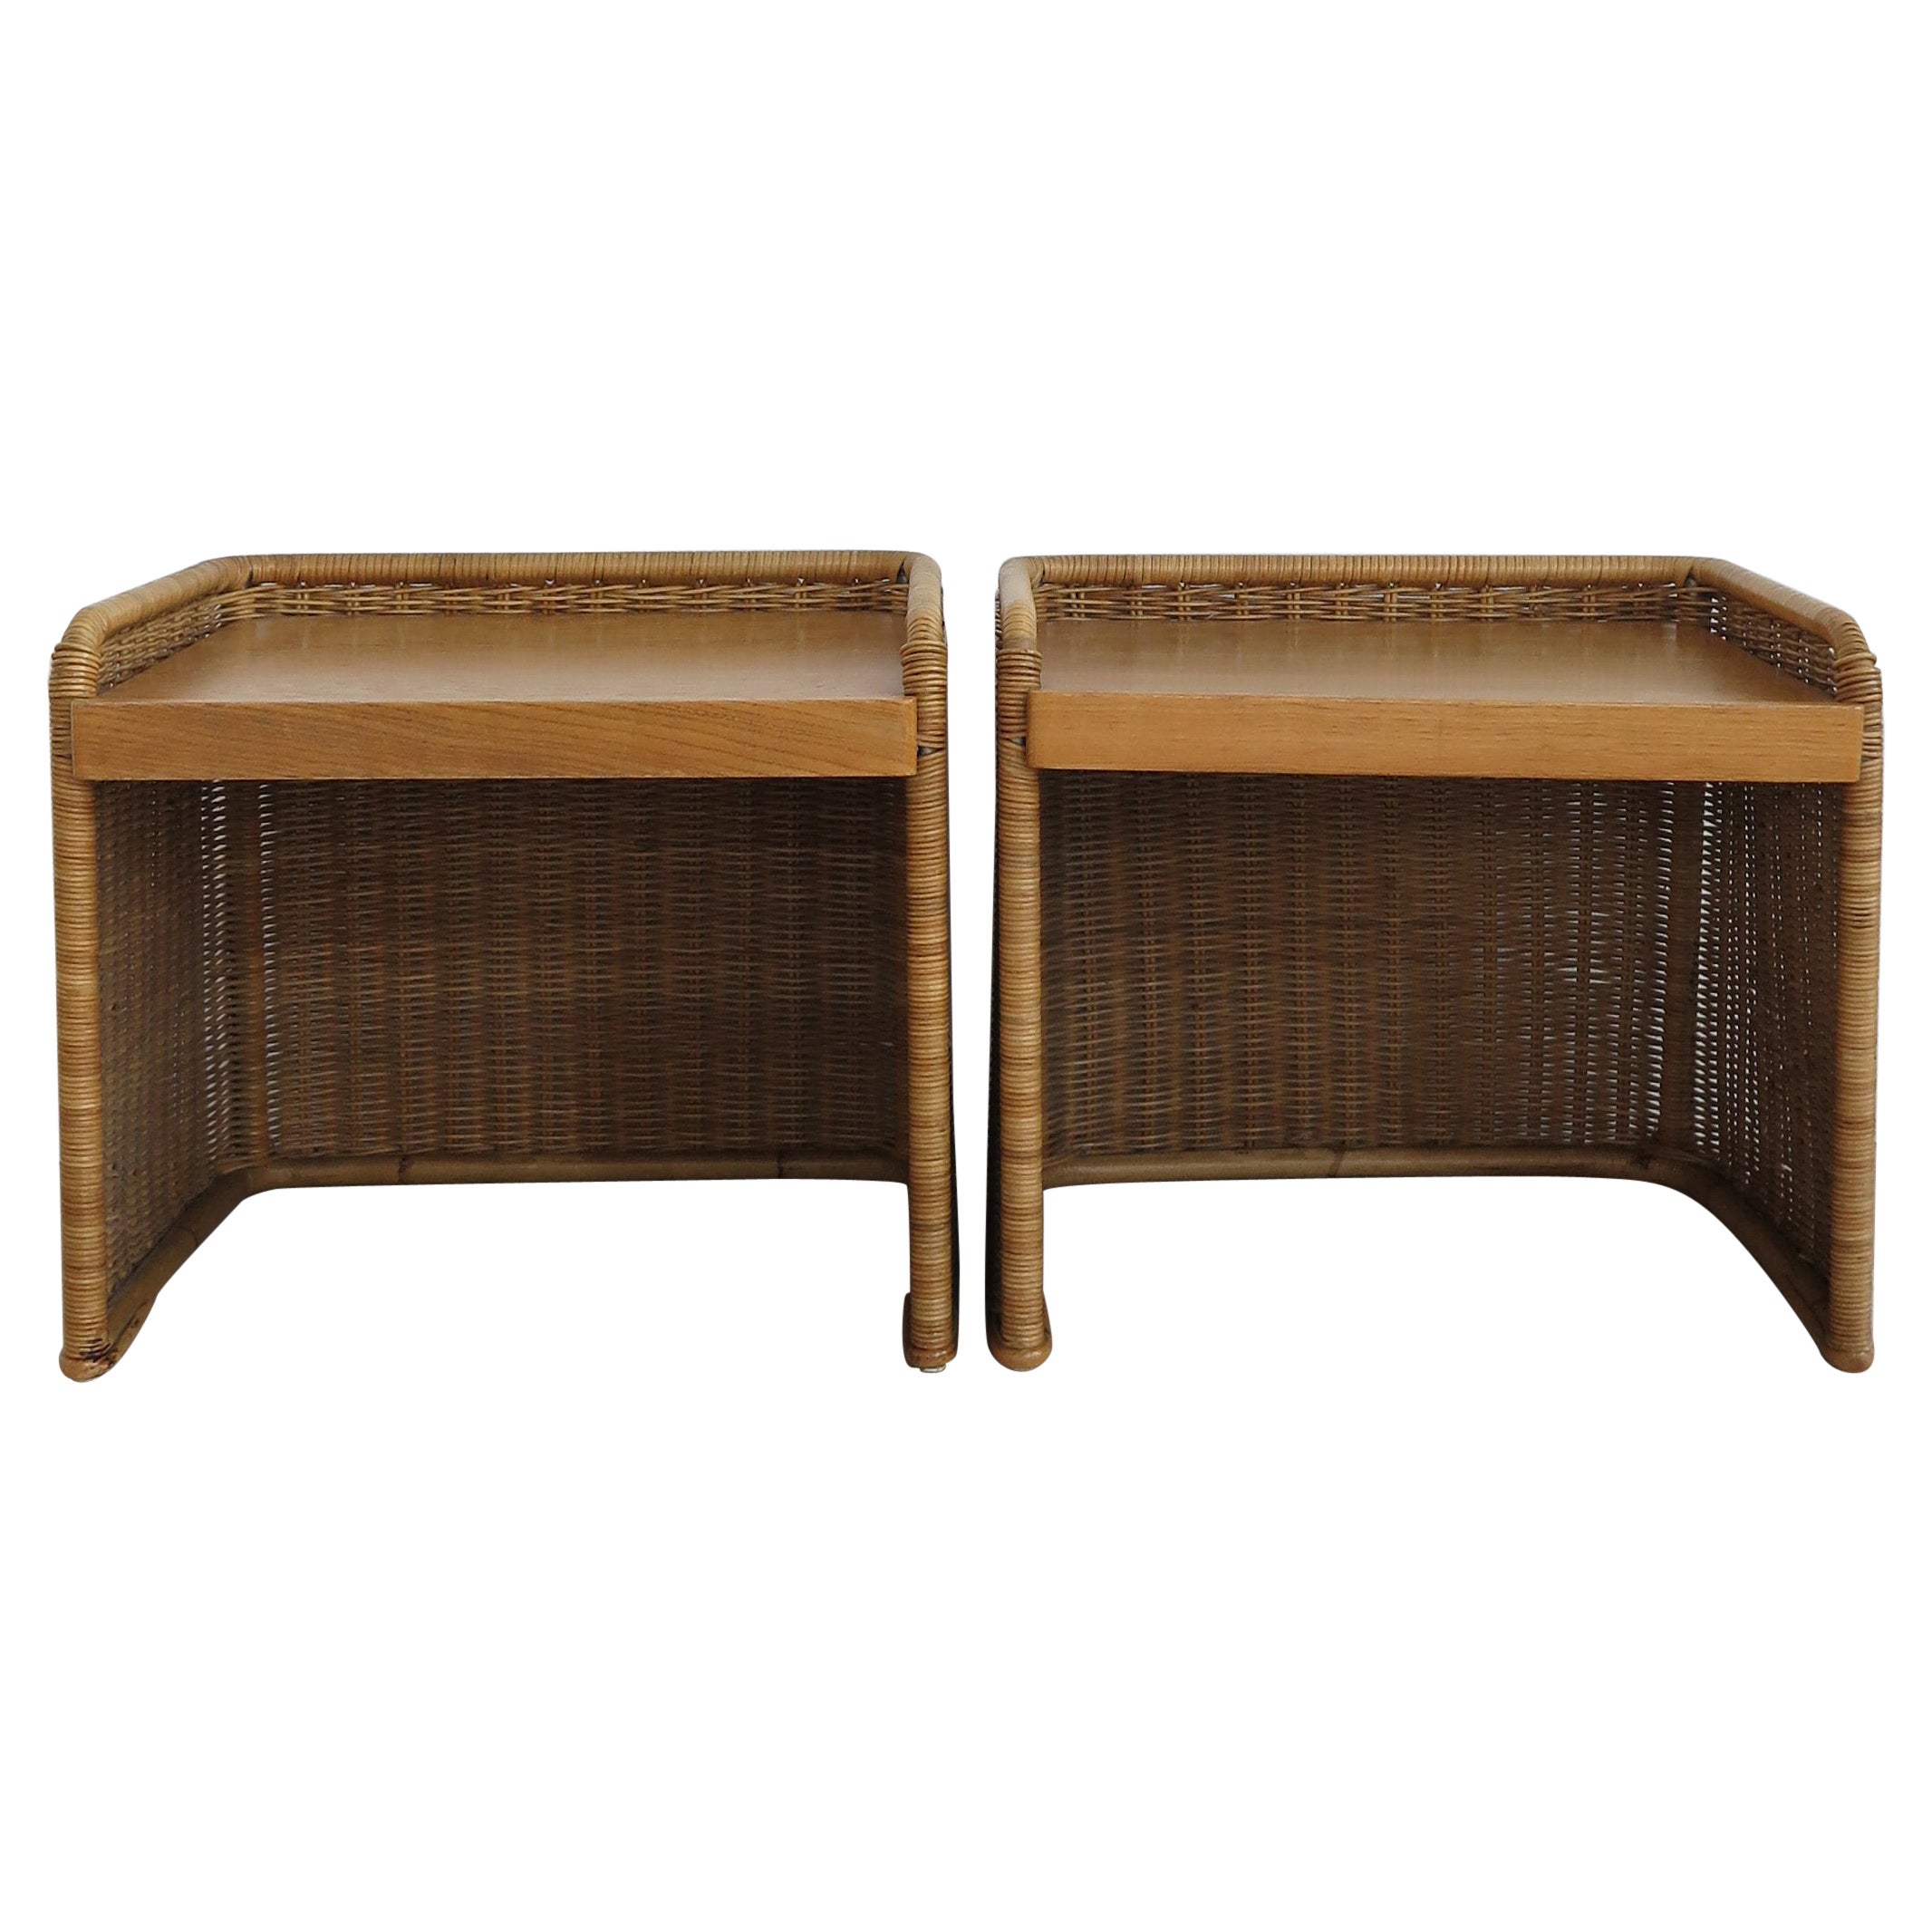 Italian Midcentury Rattan Bamboo Bedside Tables Night Stands, 1950s